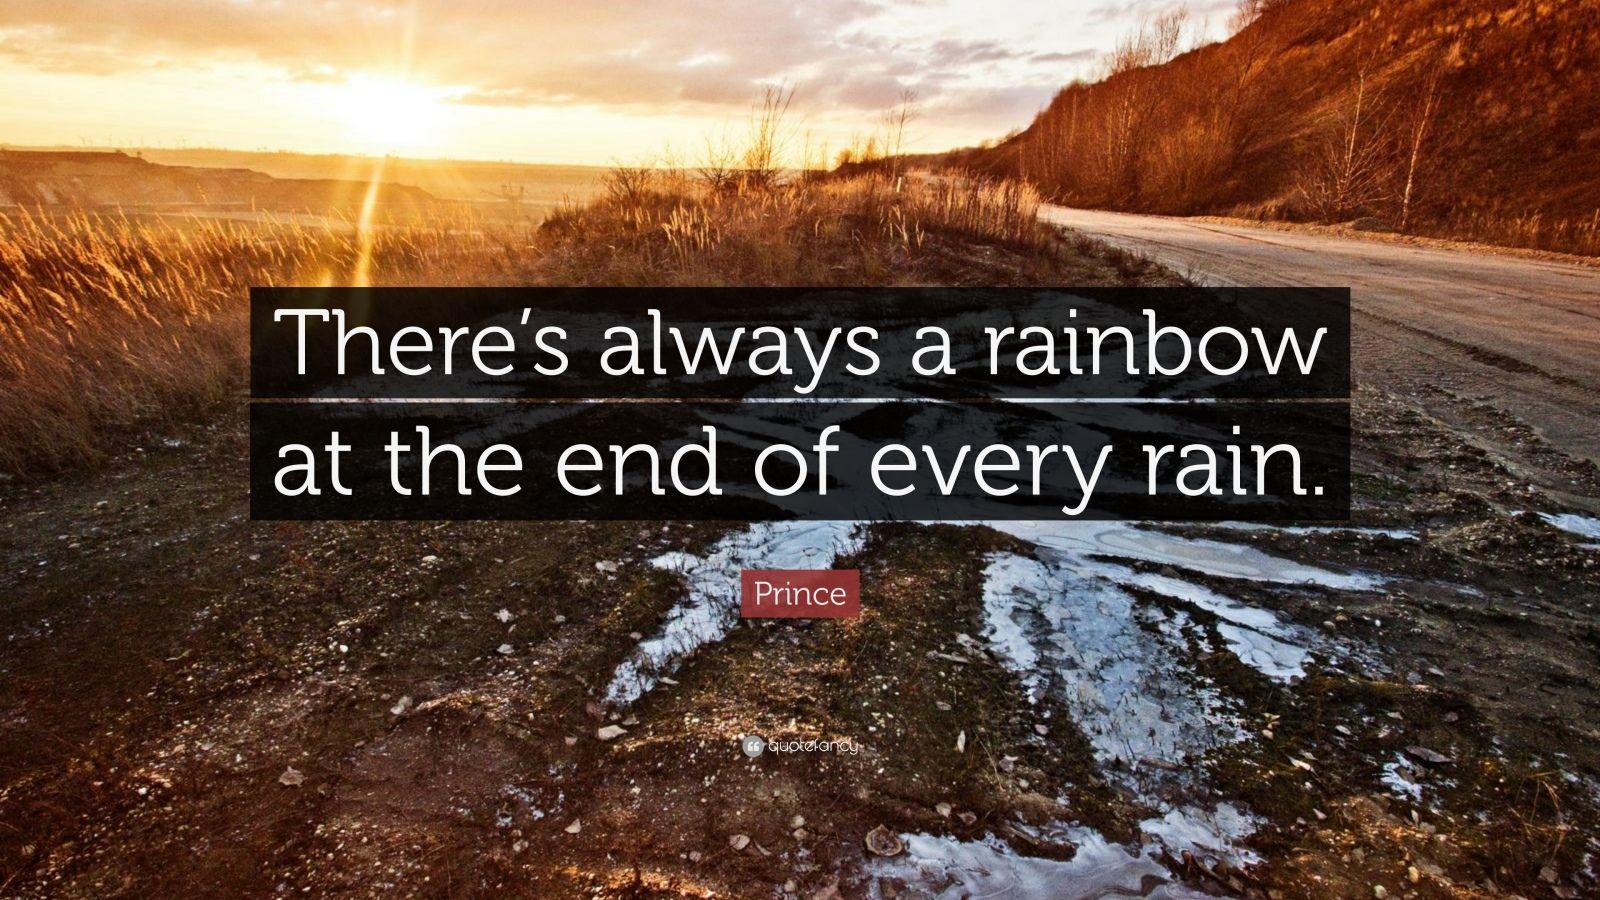 there's a rainbow after the rain essay